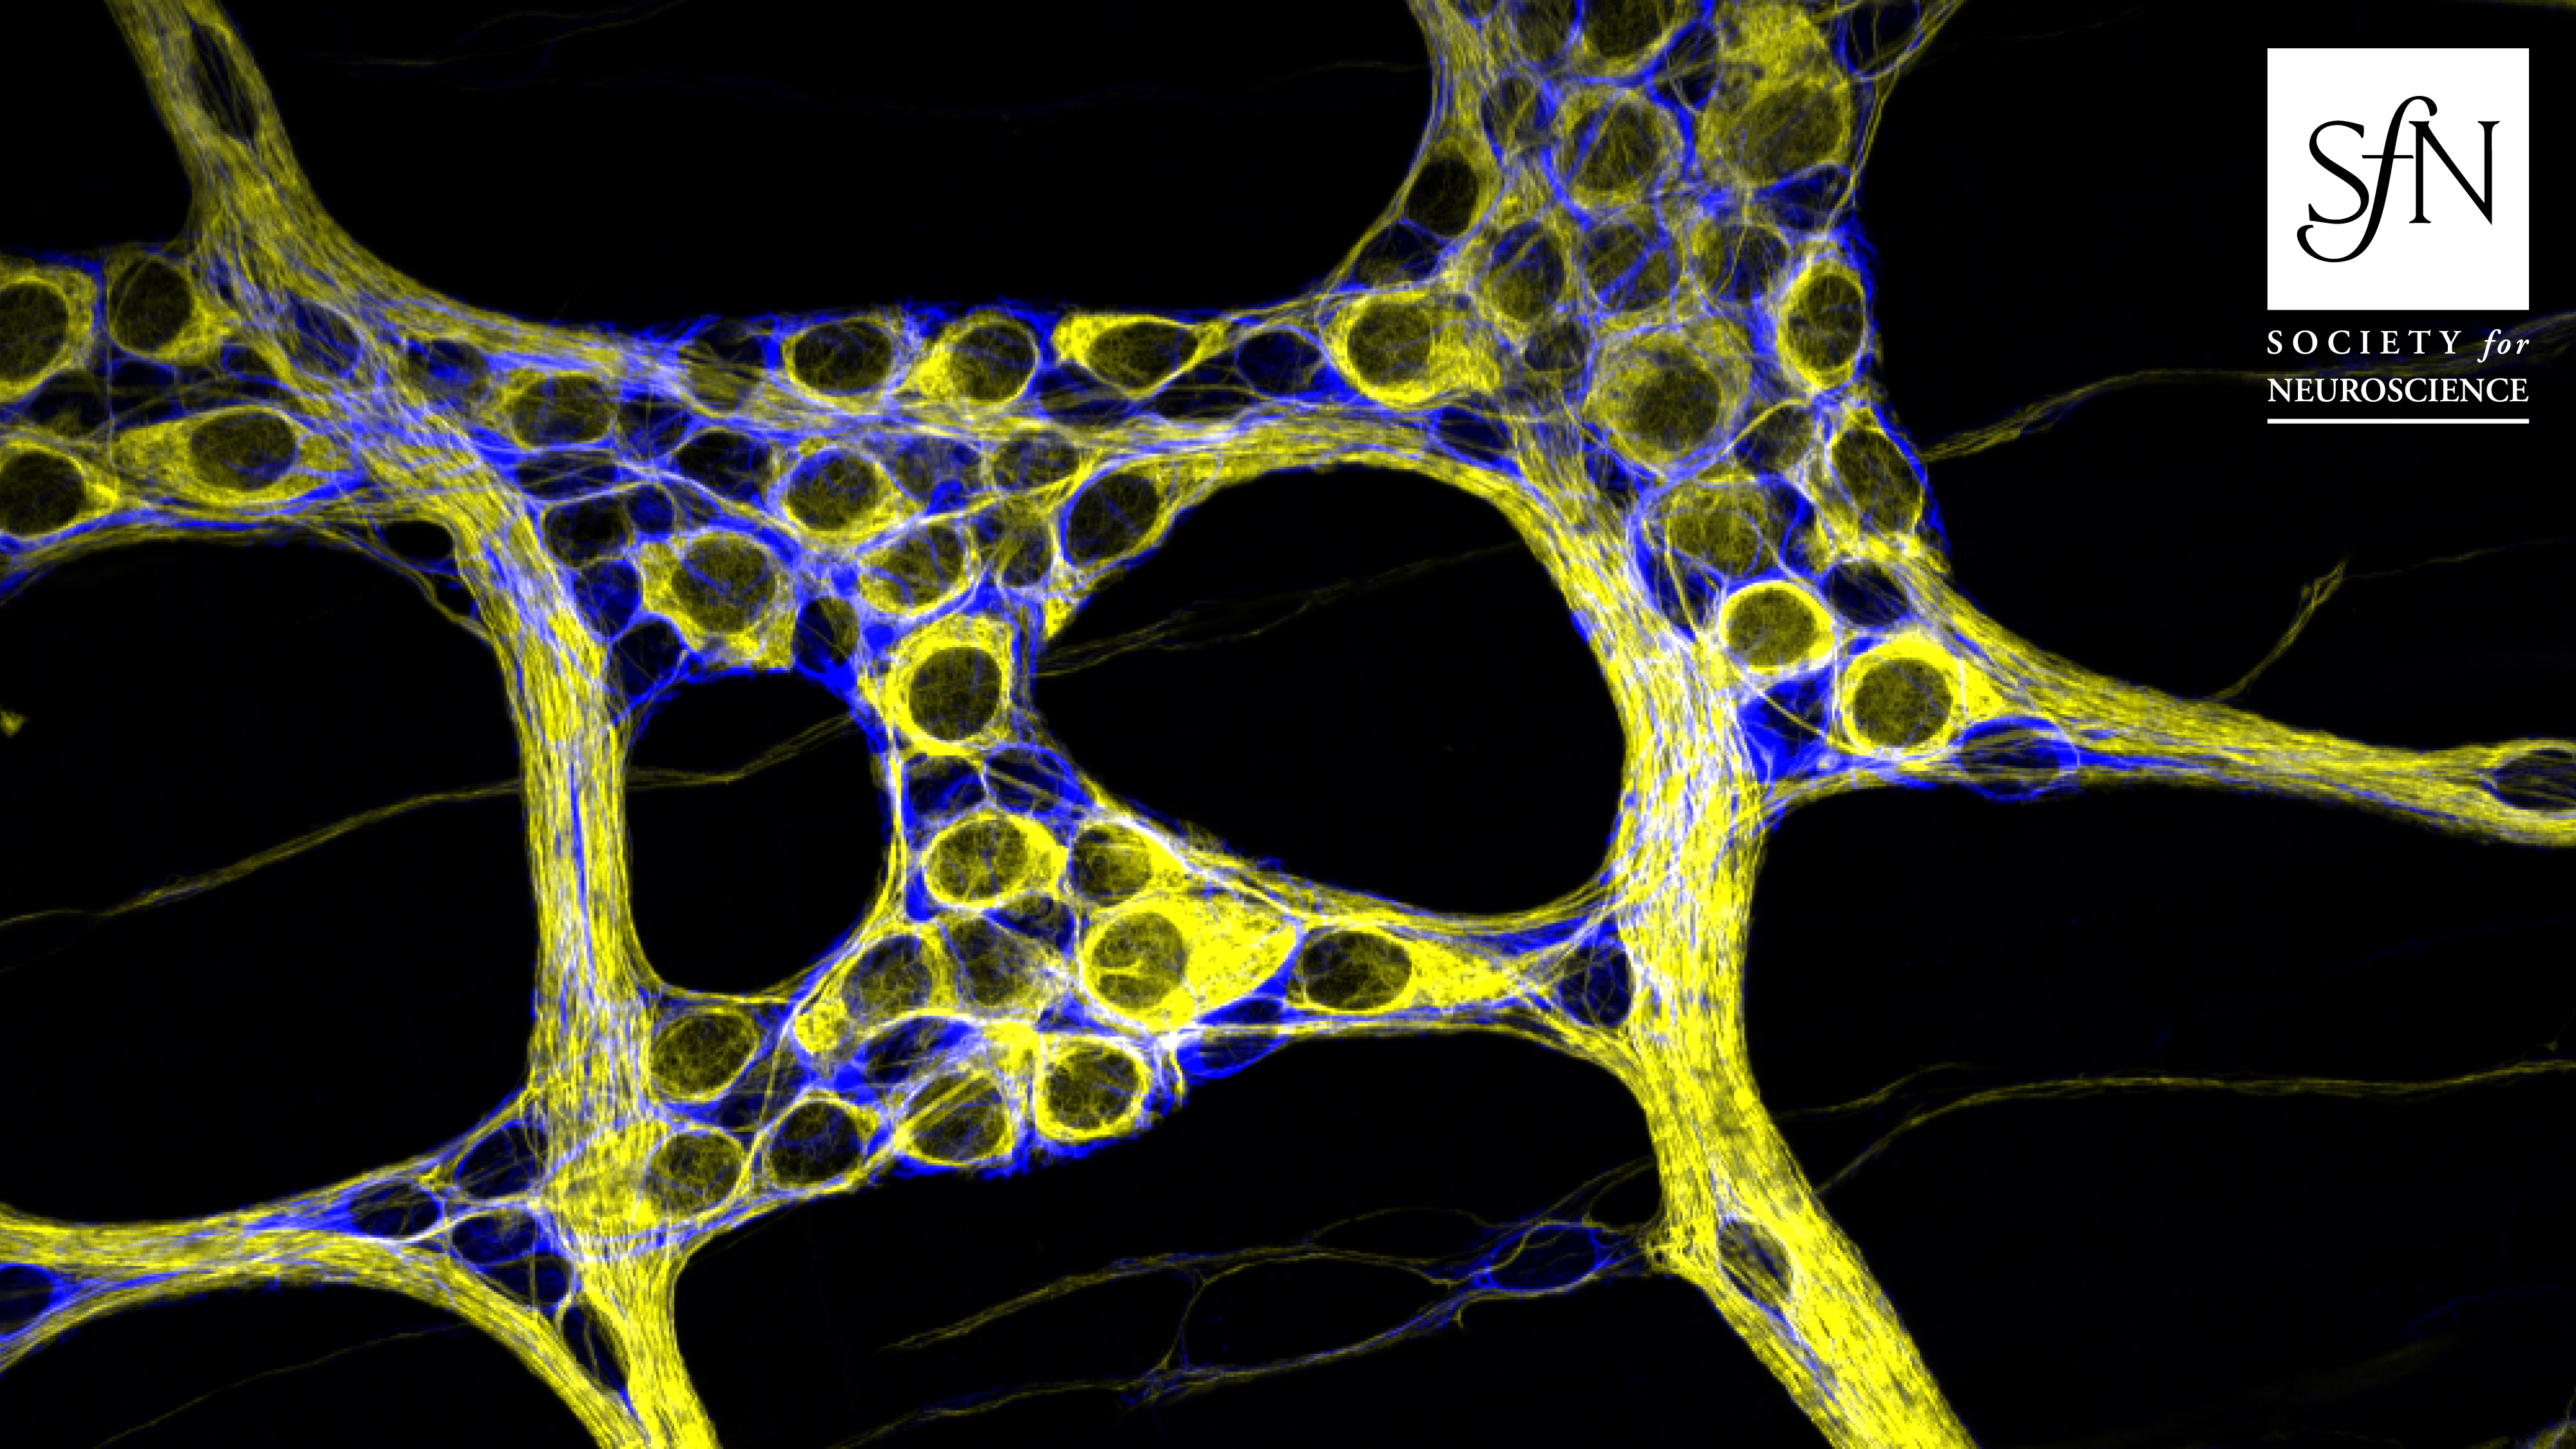 This image shows enteric neurons (identified with peripherin labeling, yellow) and glia (identified with GFAP labeling, blue) within a myenteric ganglion from the mouse colon.